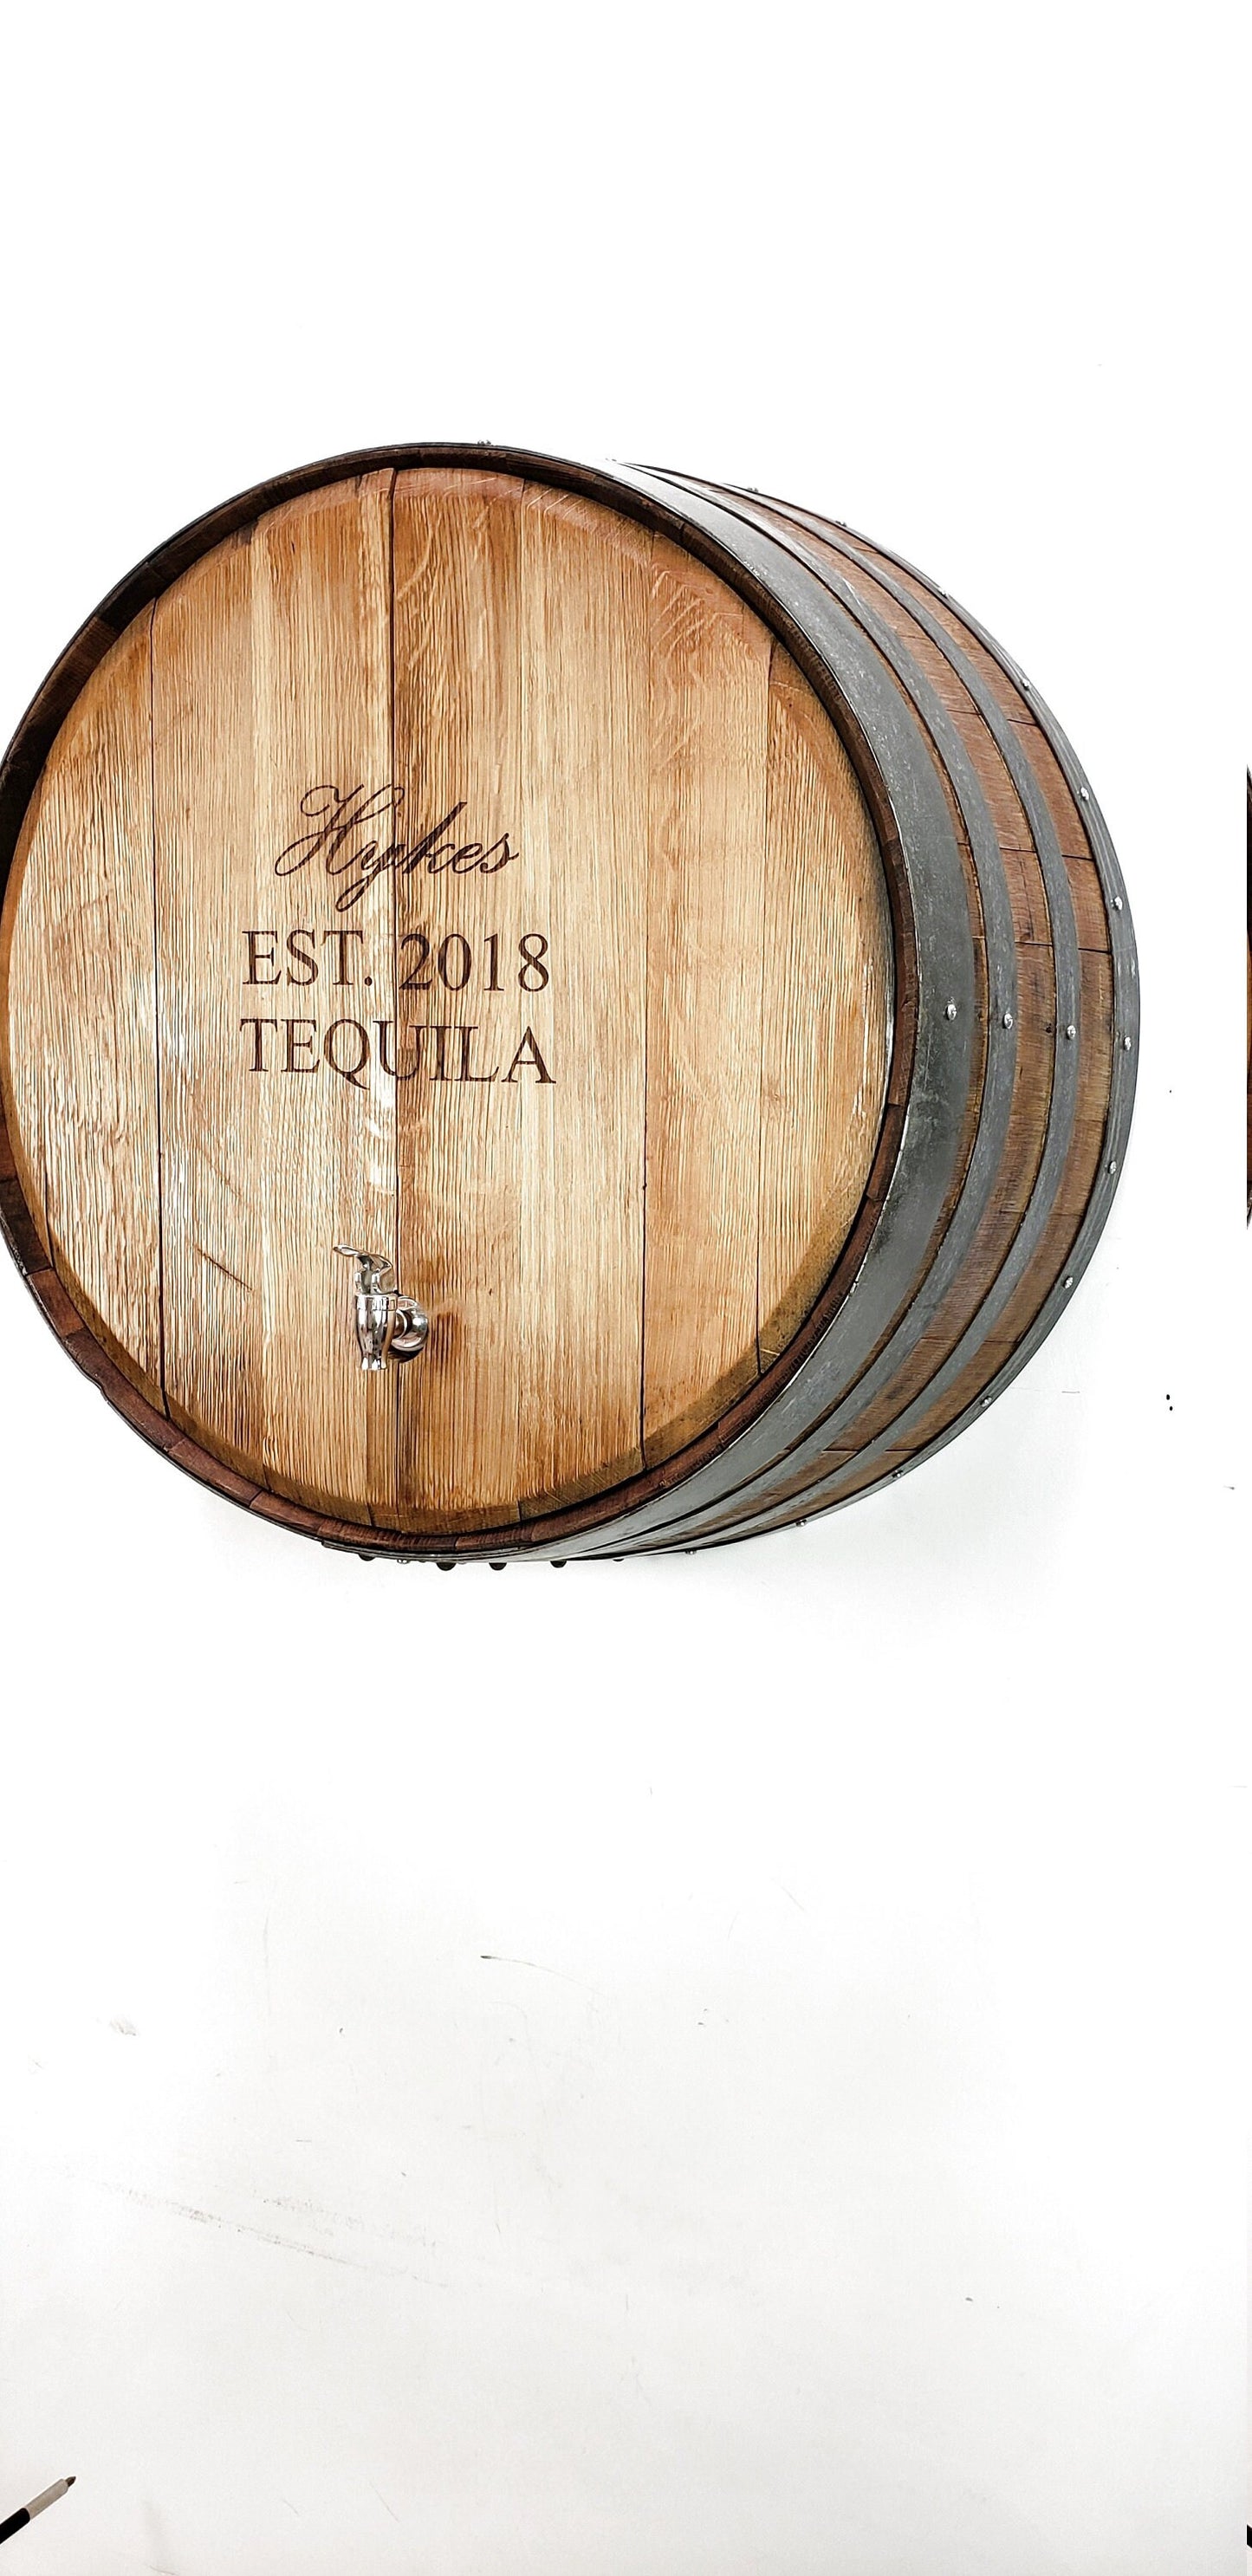 Wall Mounted Drink Dispensary - Runda - Retired Napa Wine Barrel With Custom Personalized Engraving